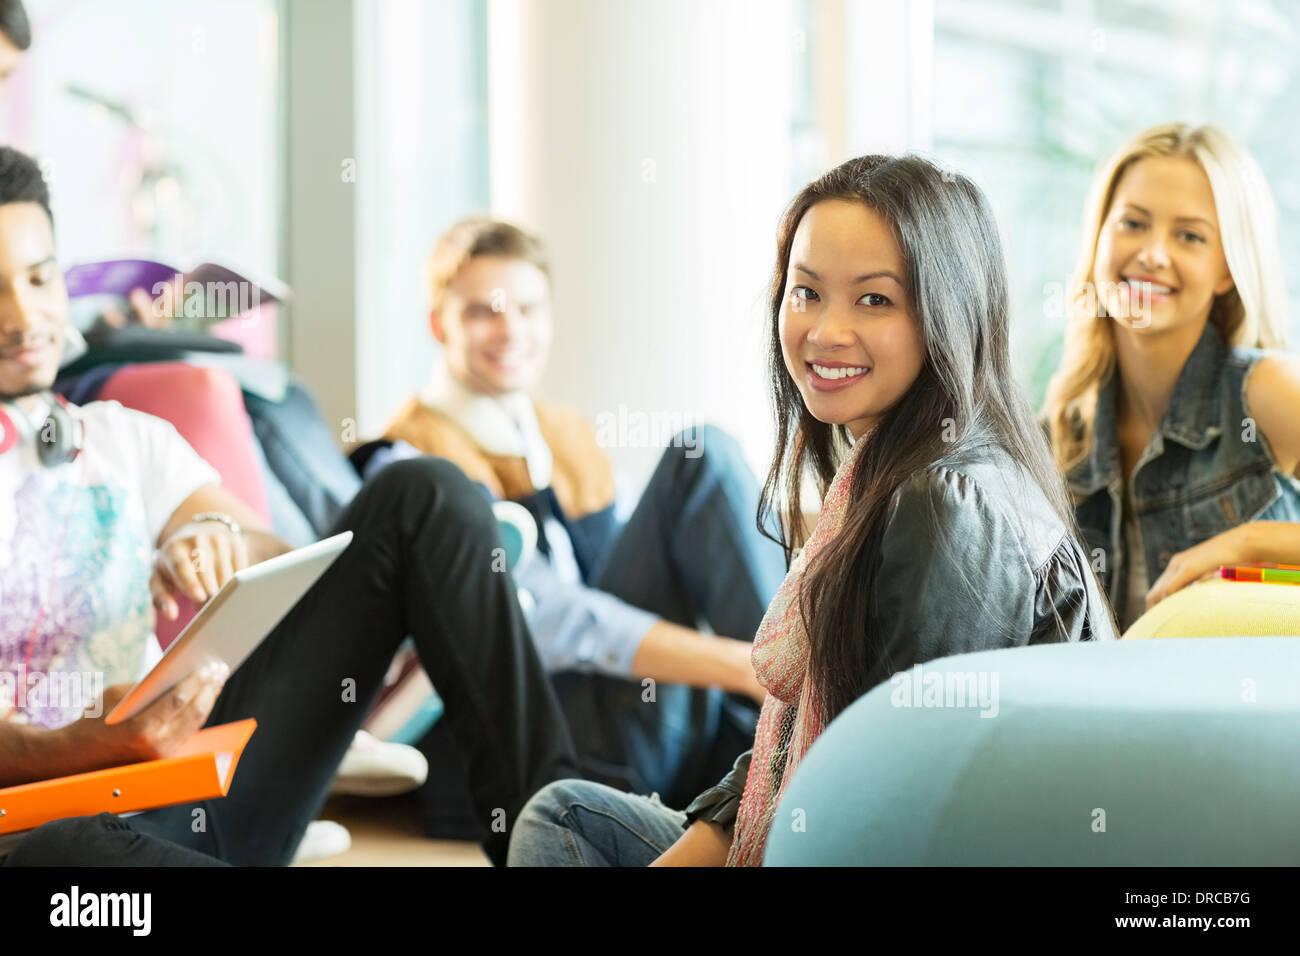 University students smiling in lounge Stock Photo